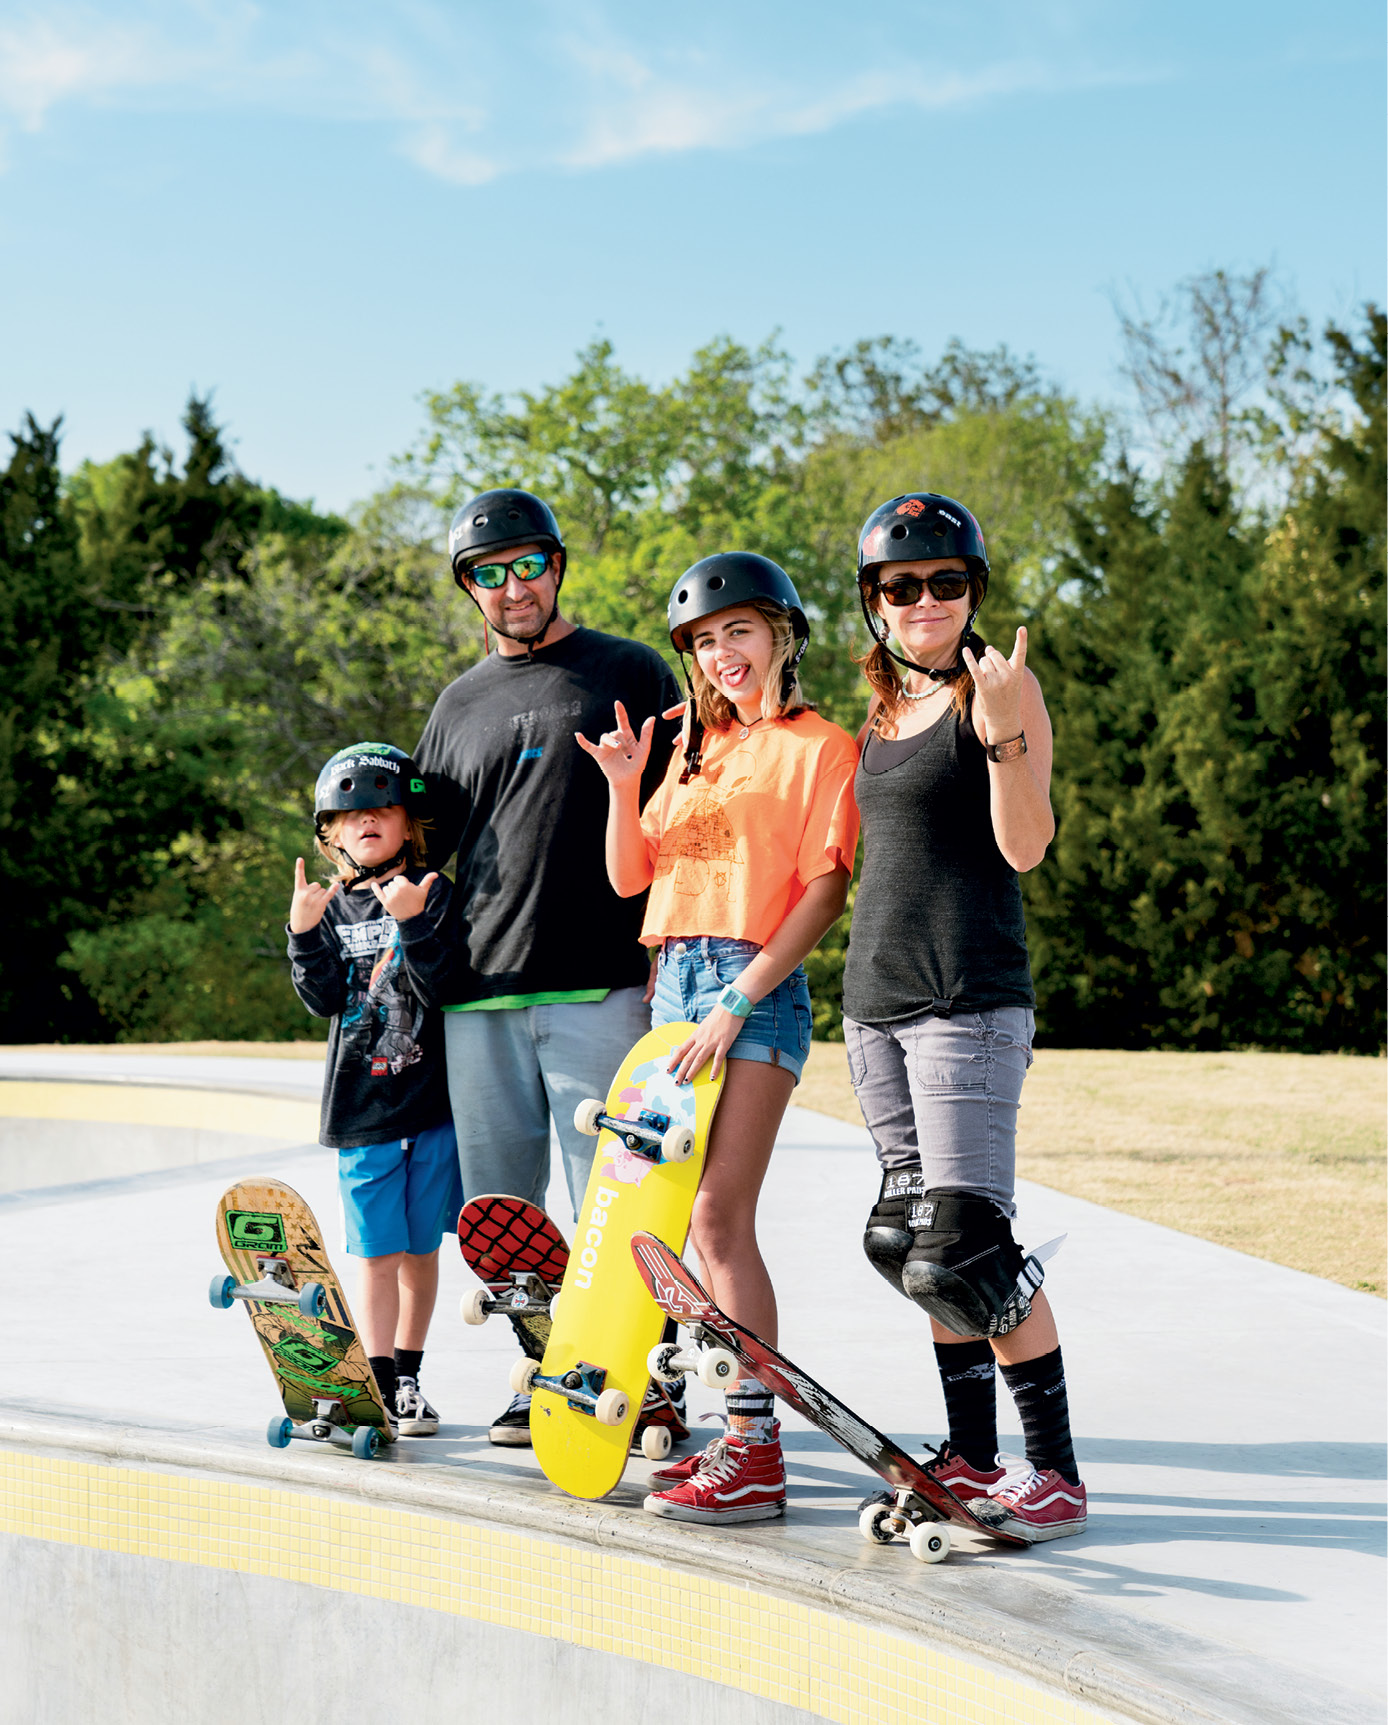 The Smith Family: Johnny Otis, Mark, Audrey, and Shannon, a longtime skater and Pour It Now advocate; “It was incredibly moving to see the park come alive and everyone so stoked,” Shannon says about opening day, “especially knowing that it will benefit countless people of all ages in multiple ways.”